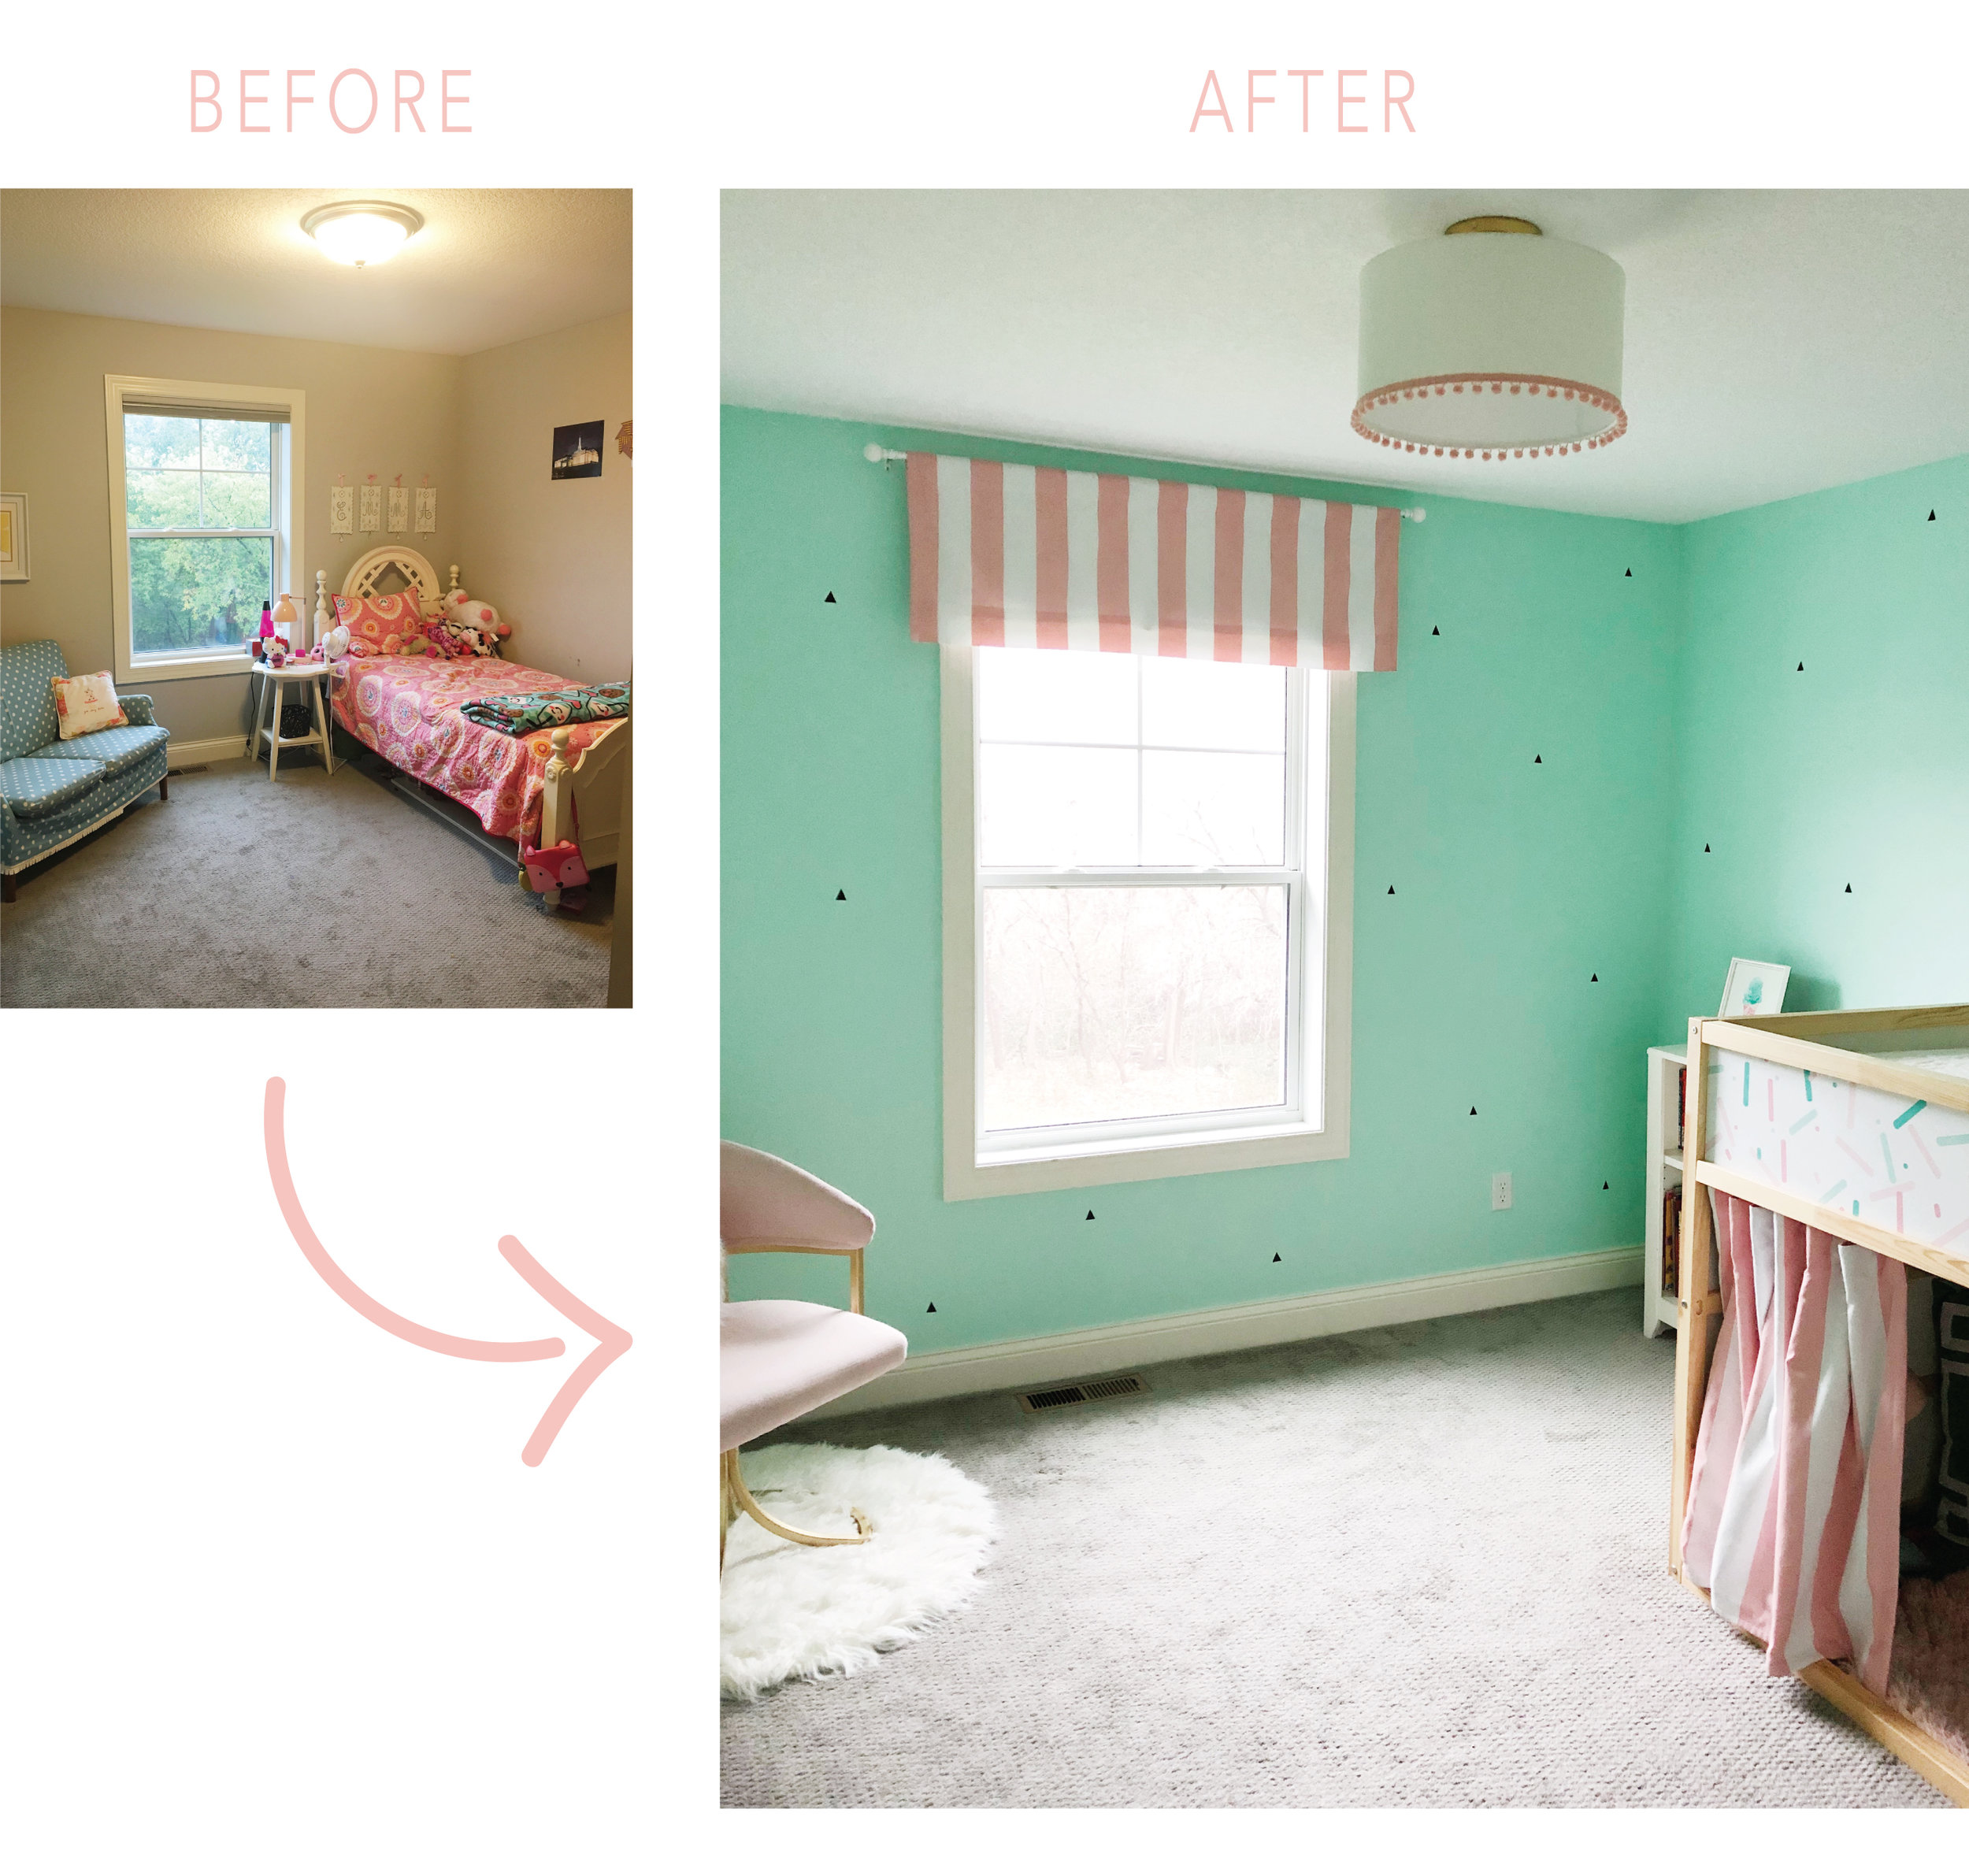 Ice Cream Themed bedroom before and after. Girls bedroom Reveal.